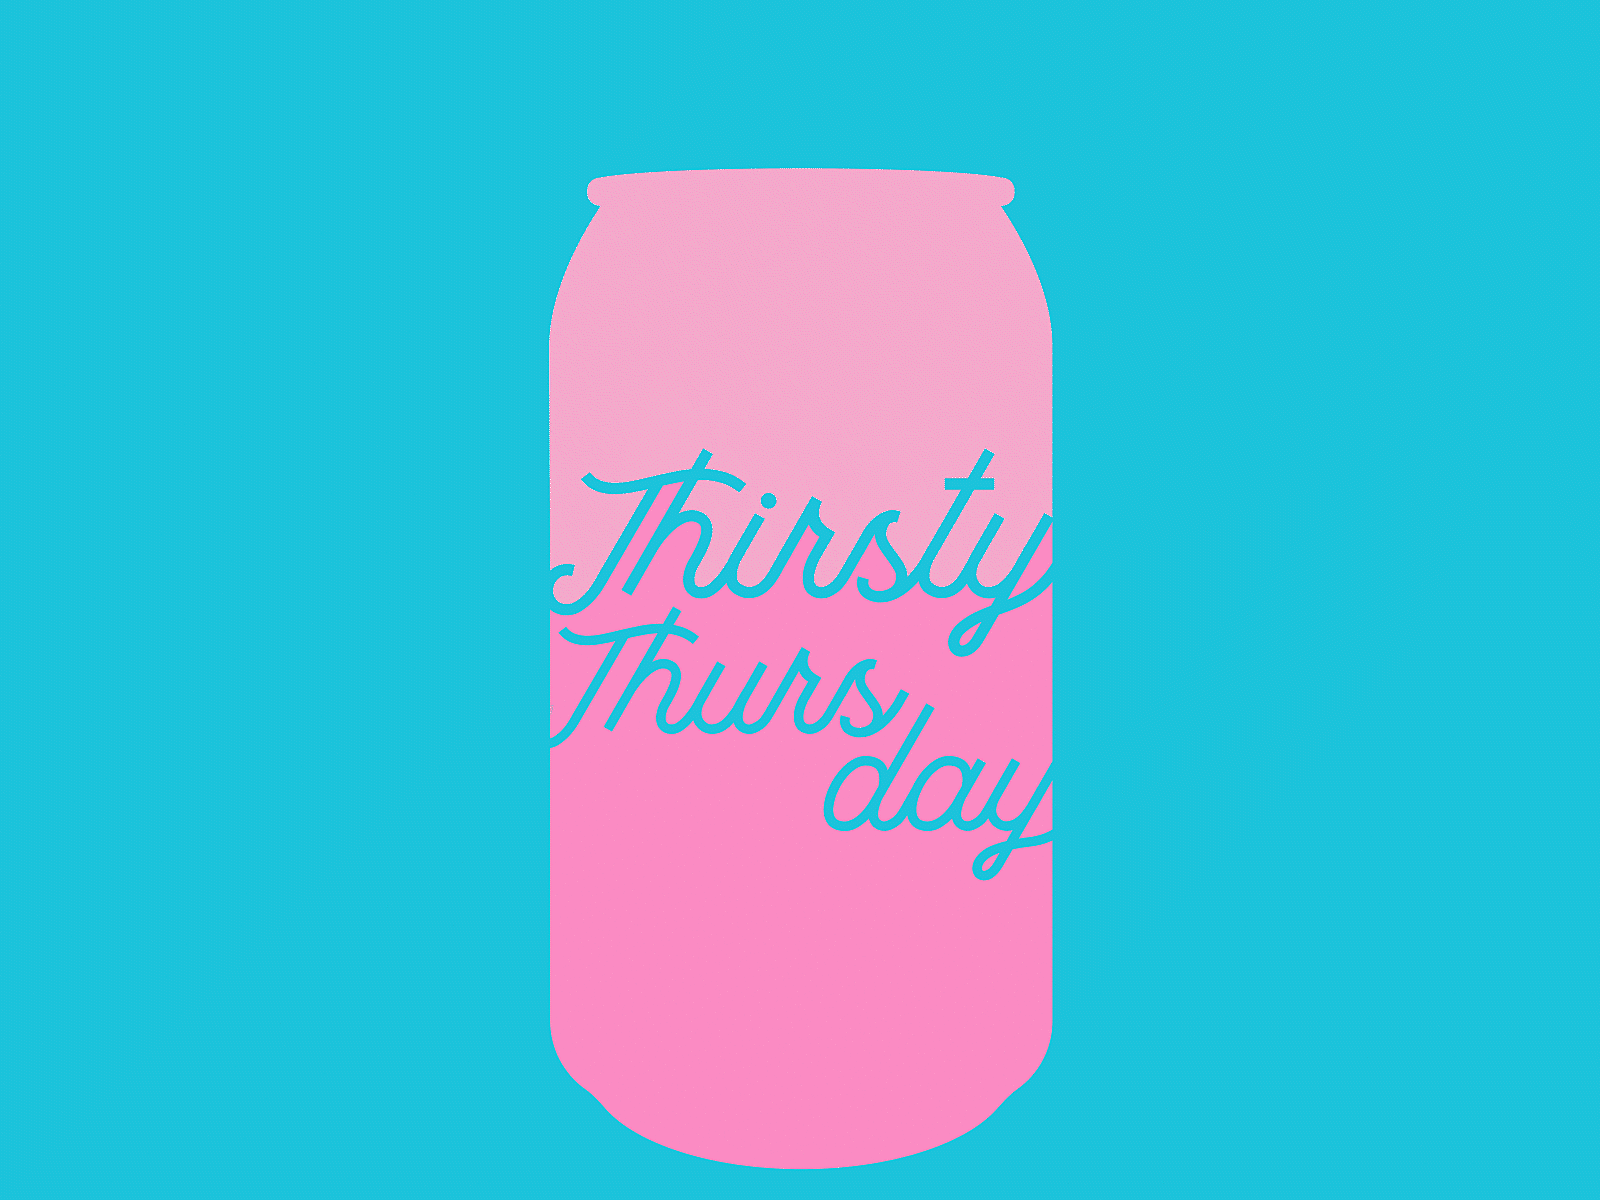 Thirsty Thursday 2d animation after effects animation aftereffects animation beer blue booze chicago happy hour illustration illustrator pink thursday vector vector art vector illustration